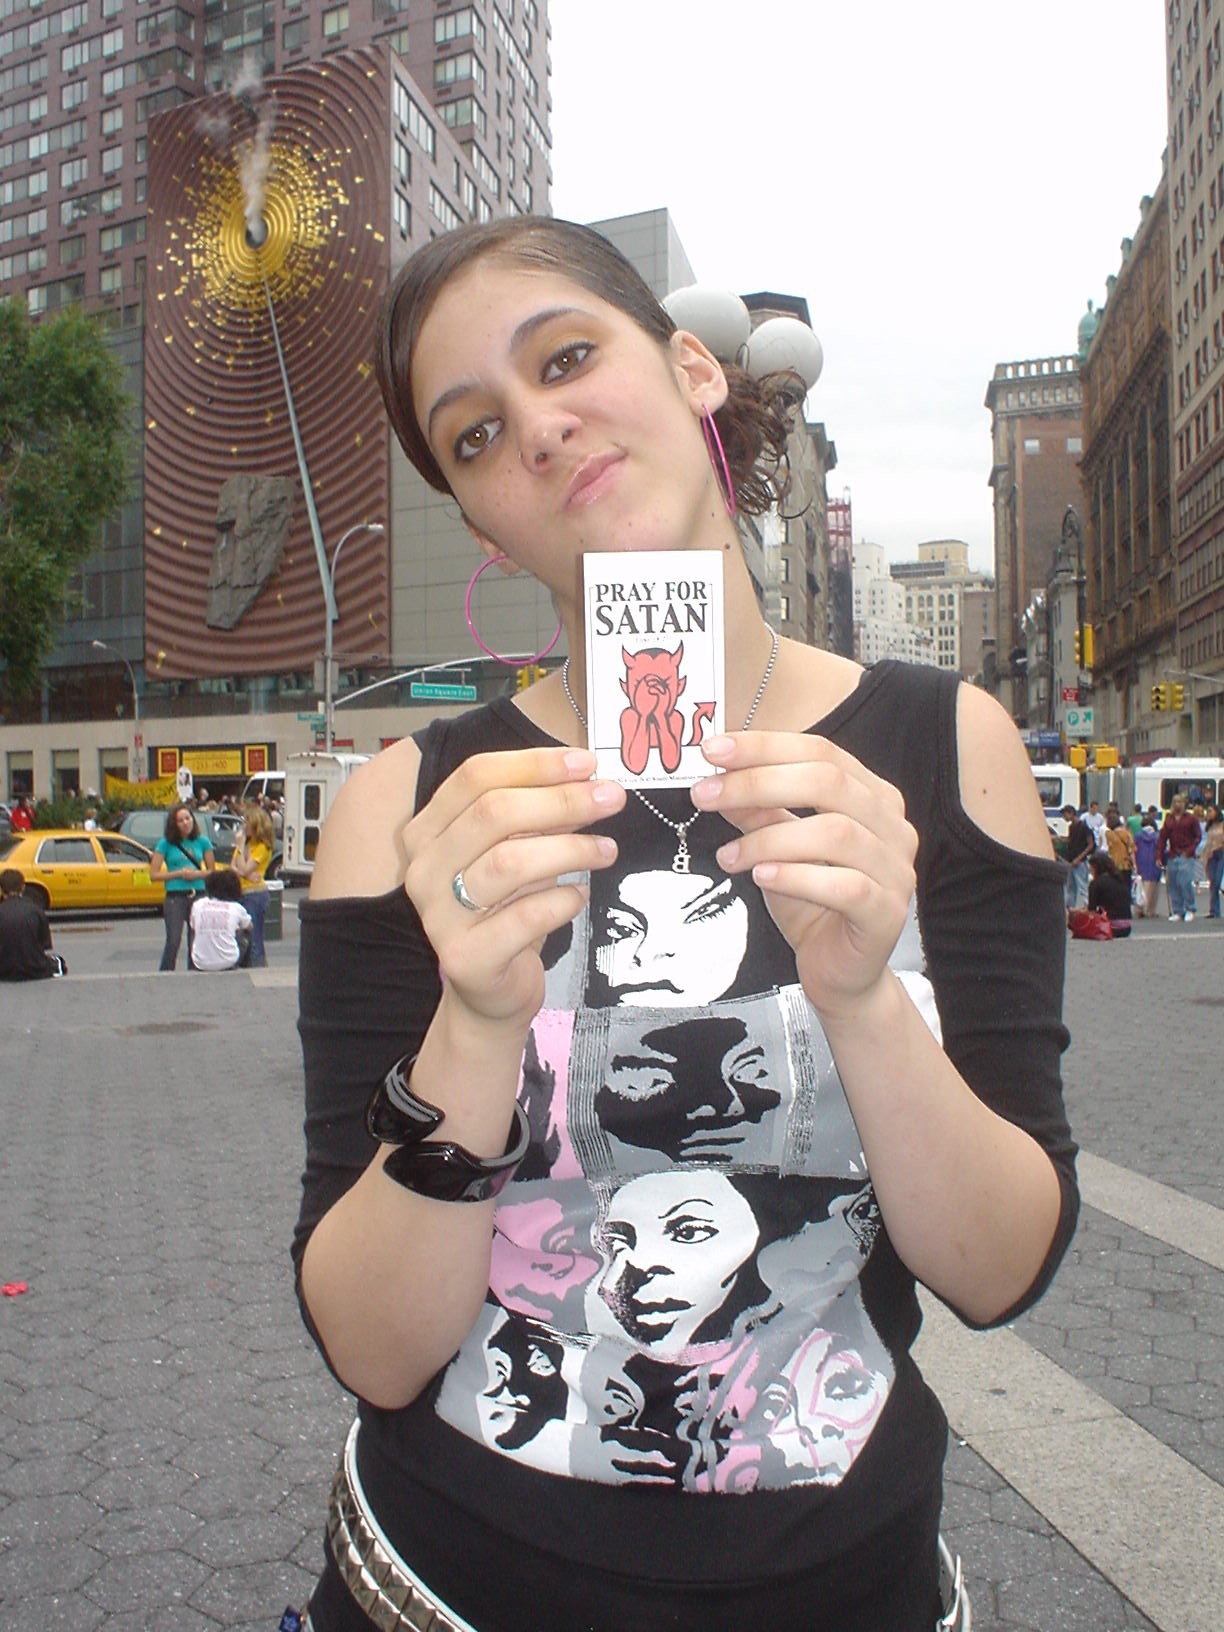 hood rat holding one of my PRAY FOR SATAN flyers